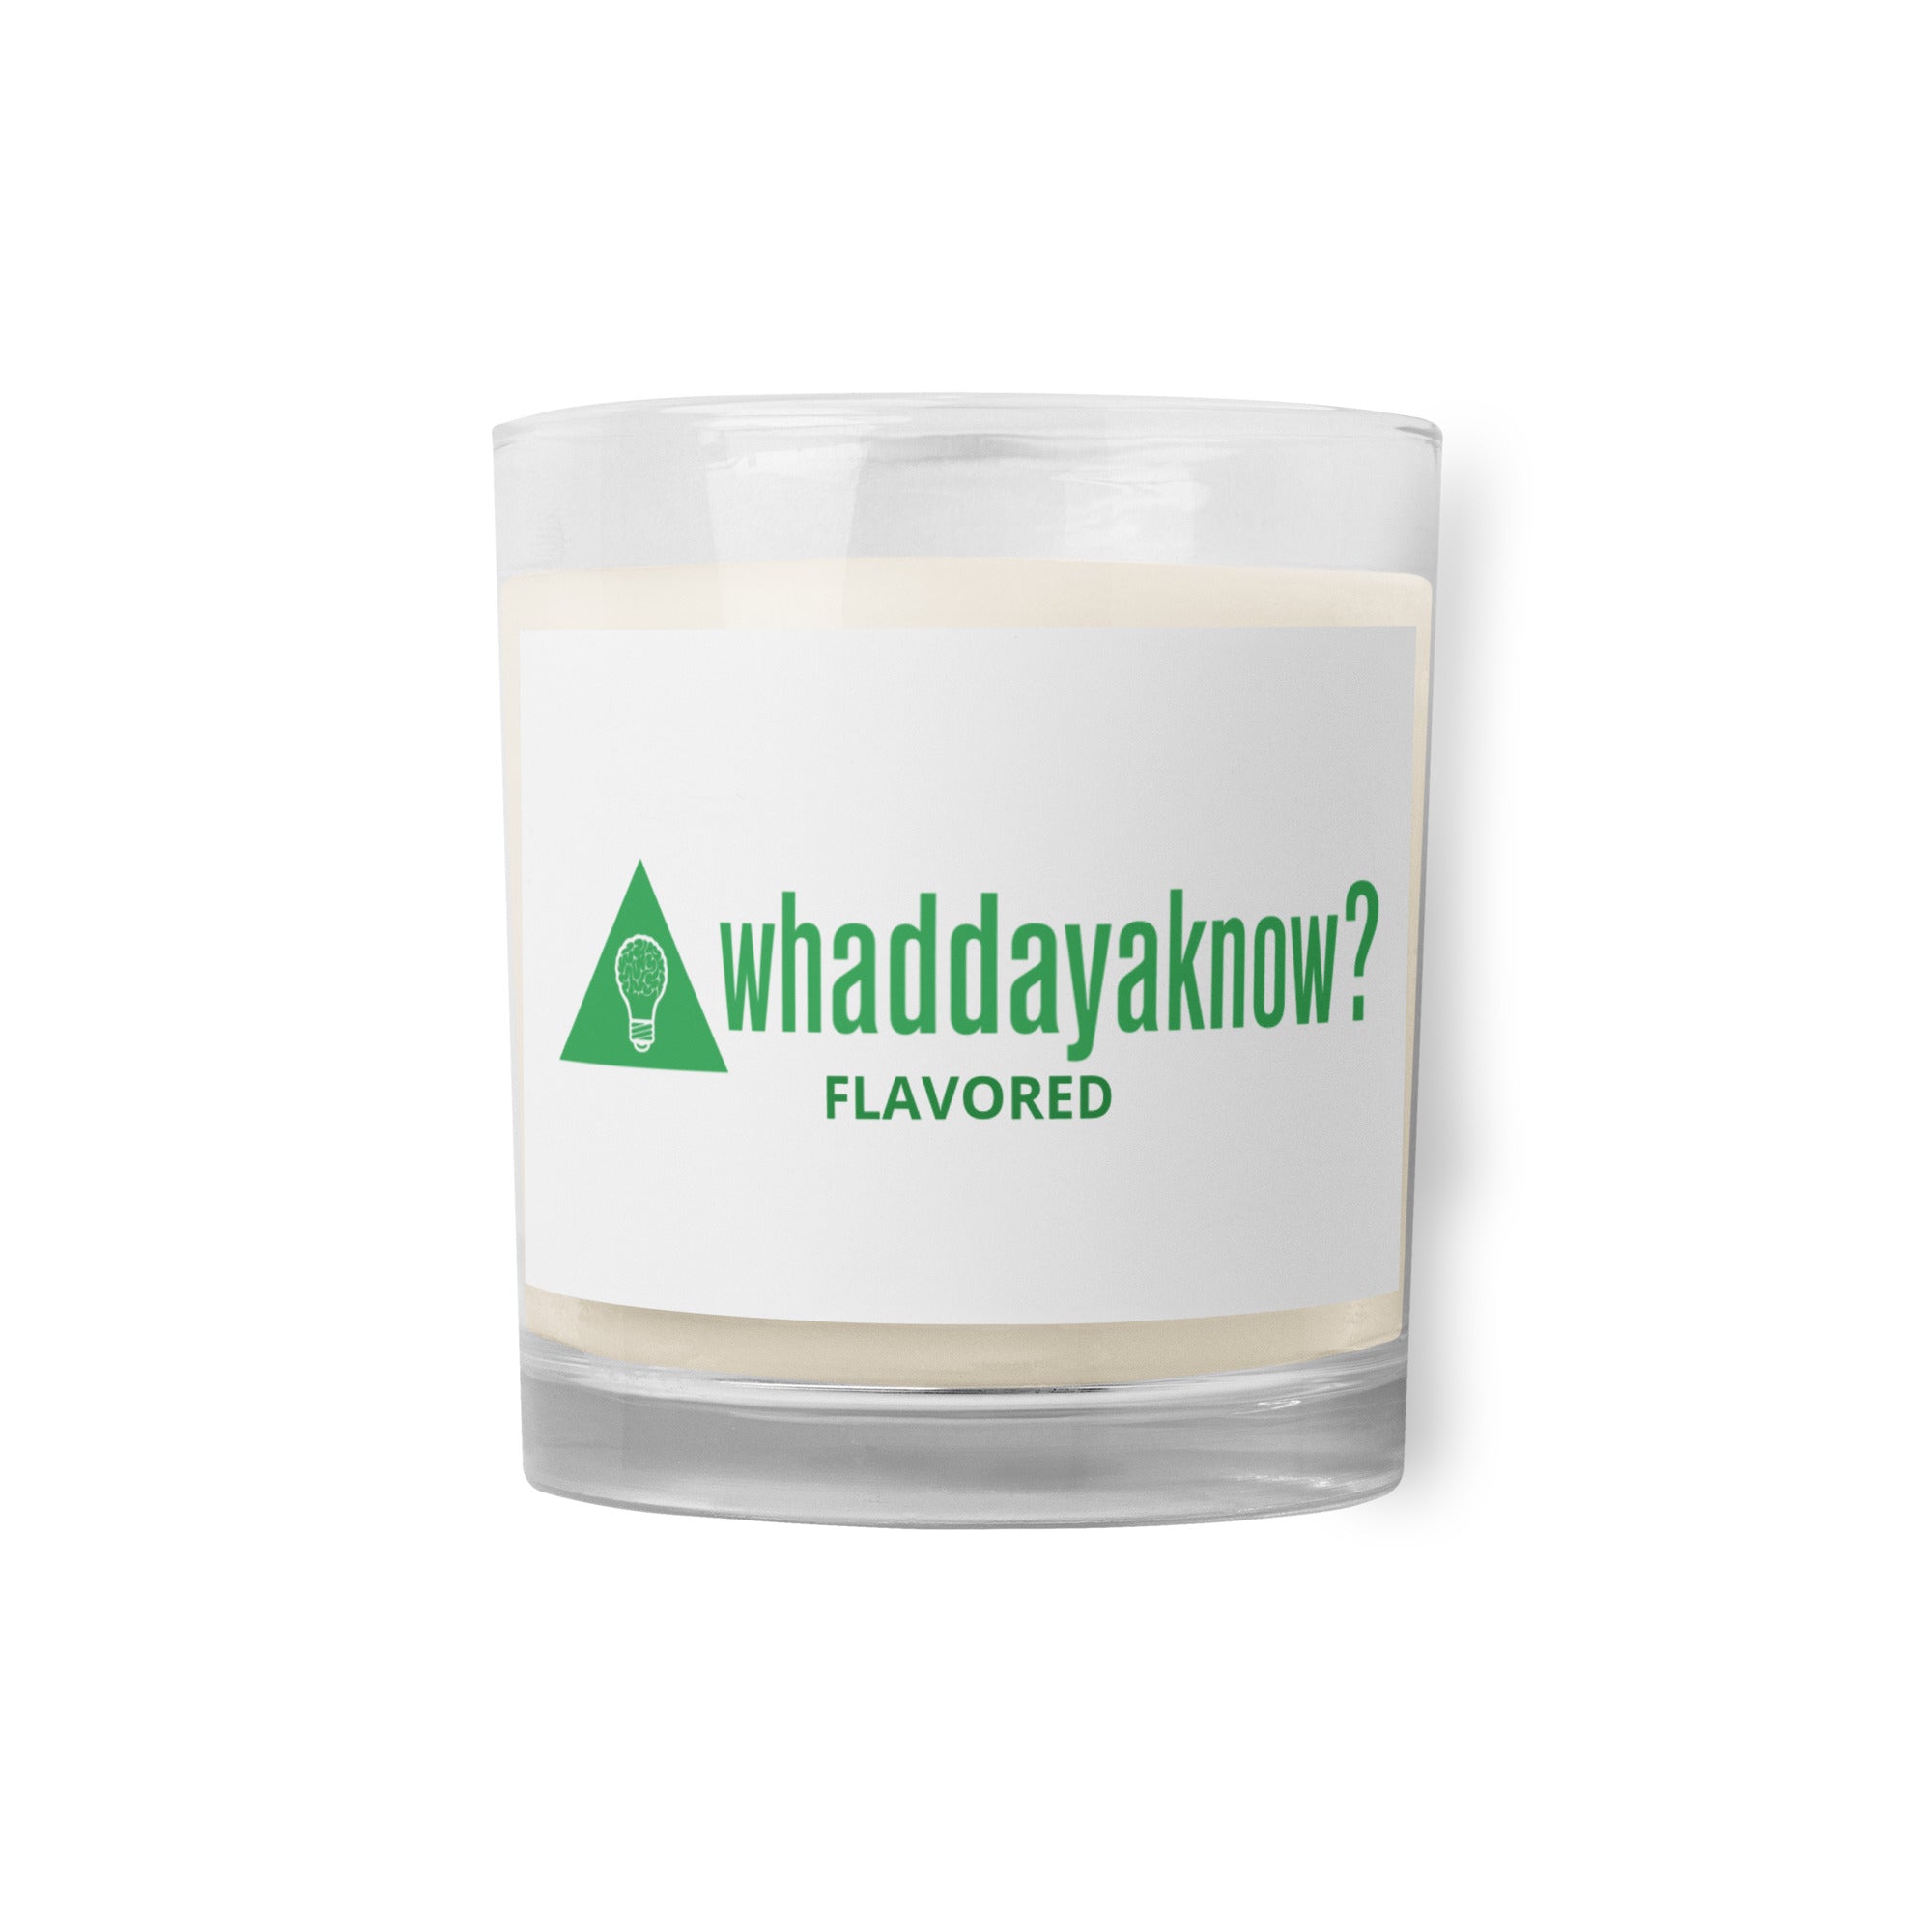 Whaddayaknow? 'Flavored' Soy Wax Candle - Silent Scent Symphony